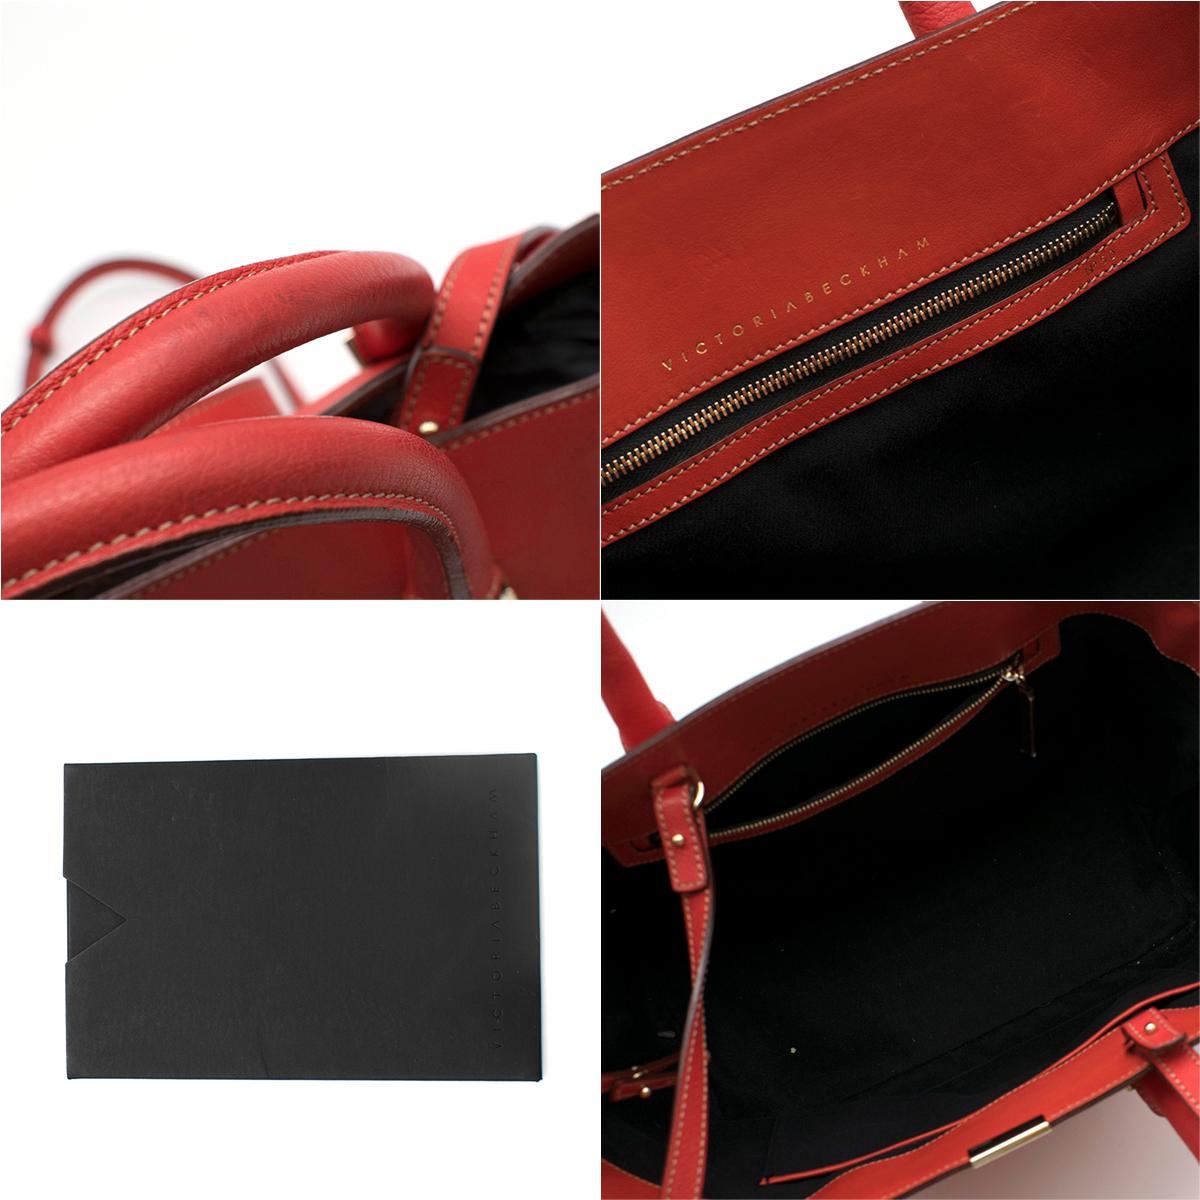 Victoria Beckham Red Liberty Leather Tote bag   5